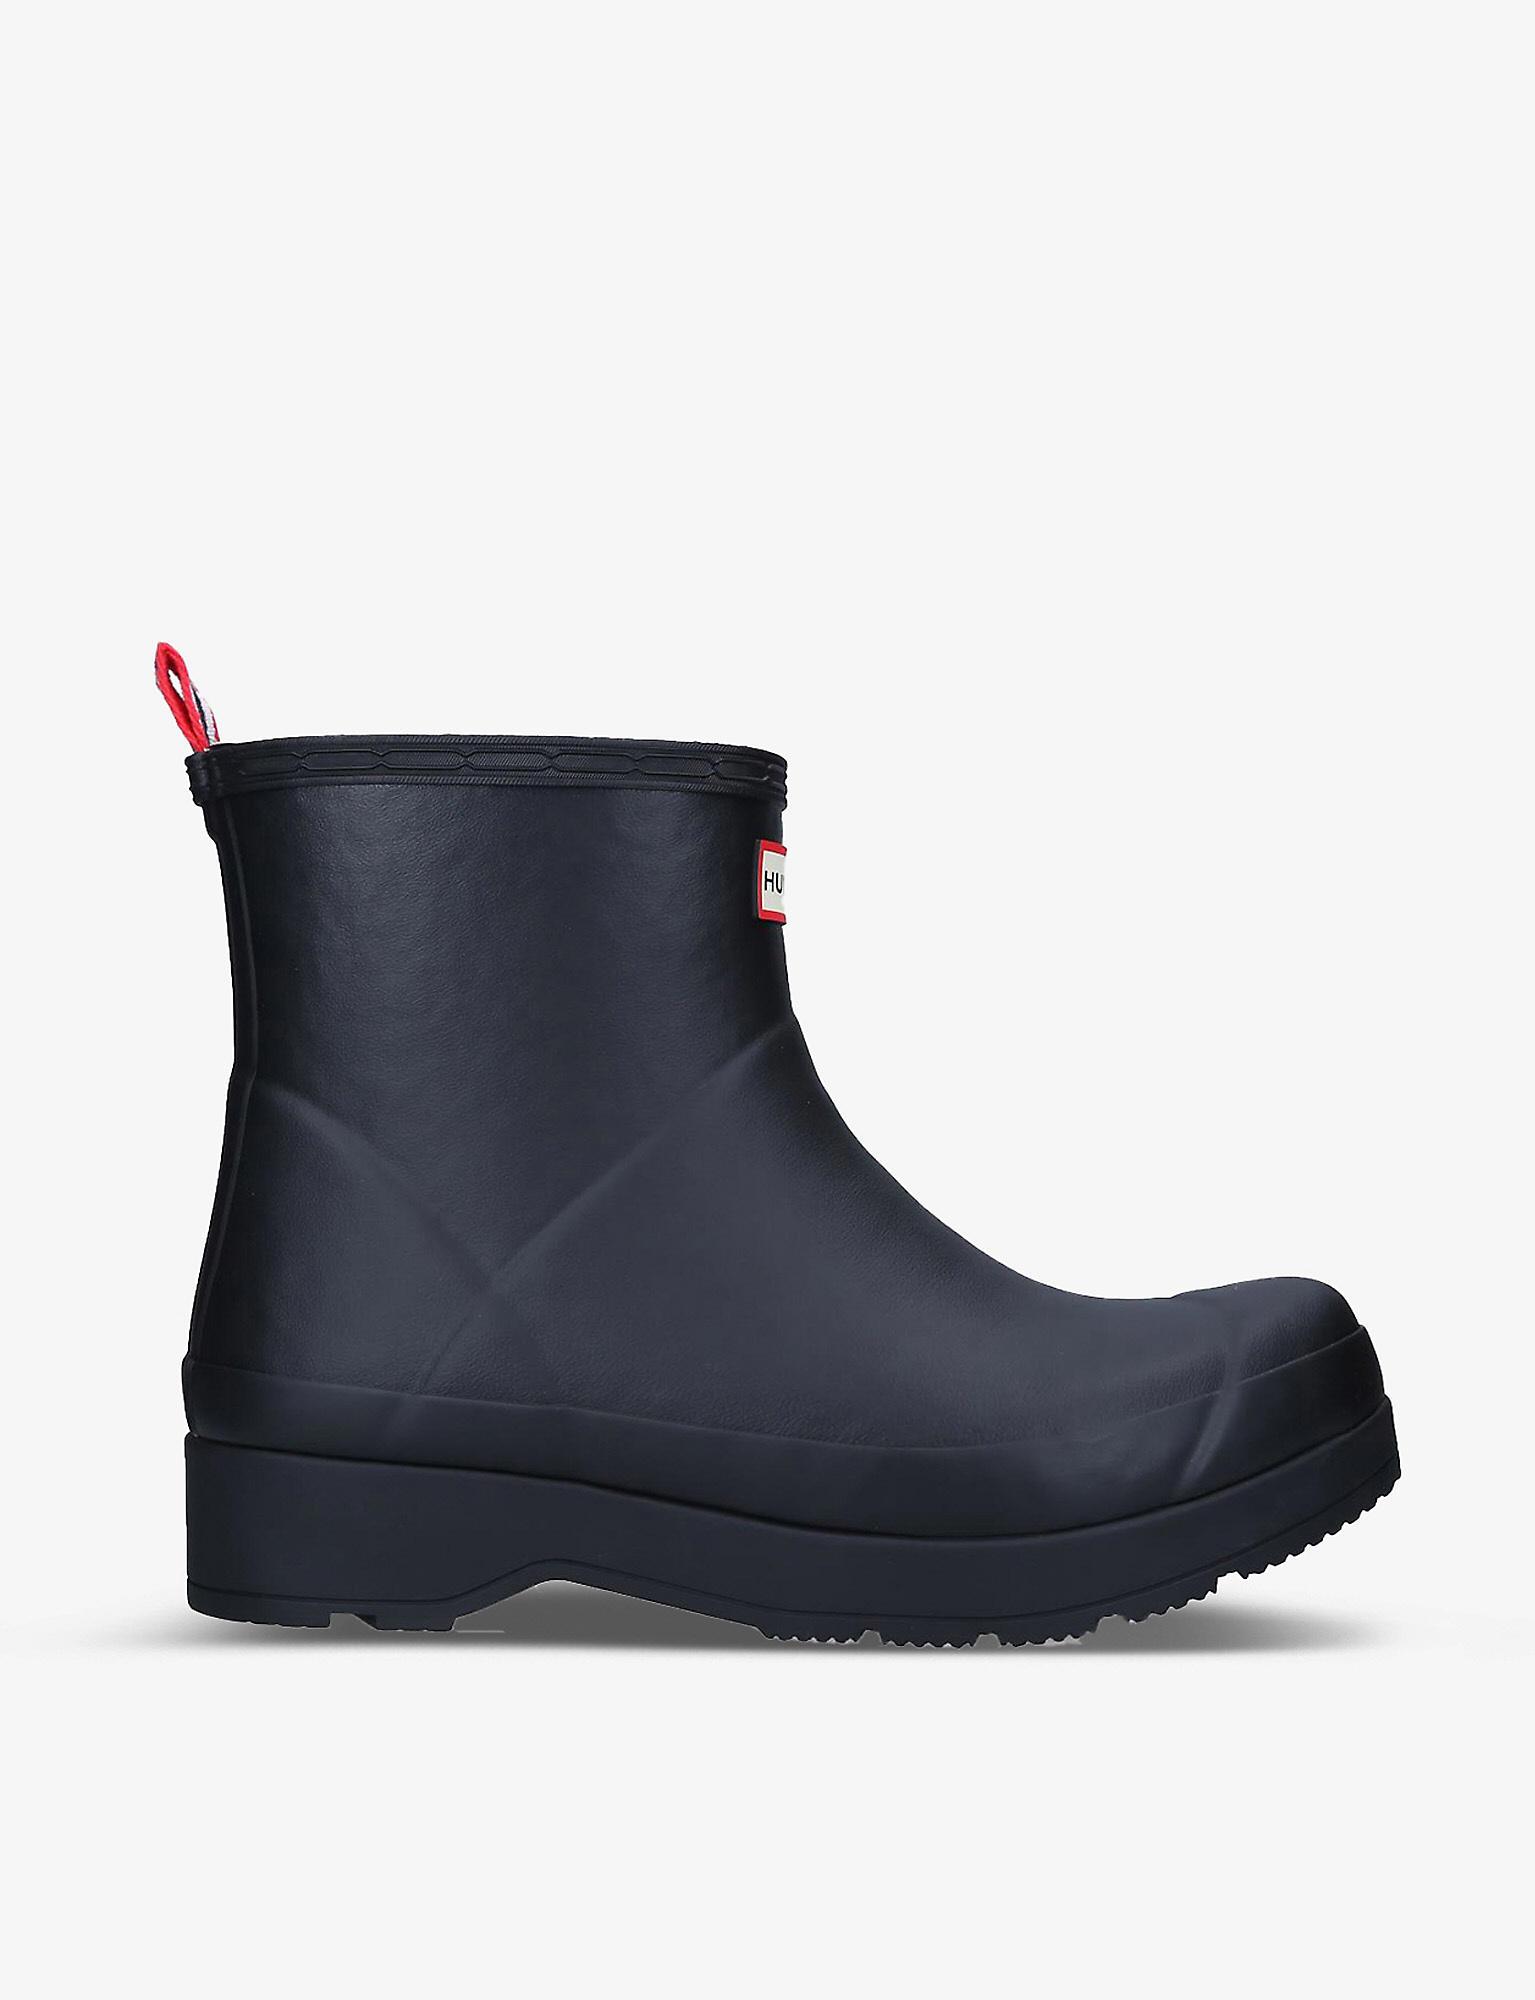 HUNTER Original Play Brand-patch Rubber Wellington Boots in Blue | Lyst